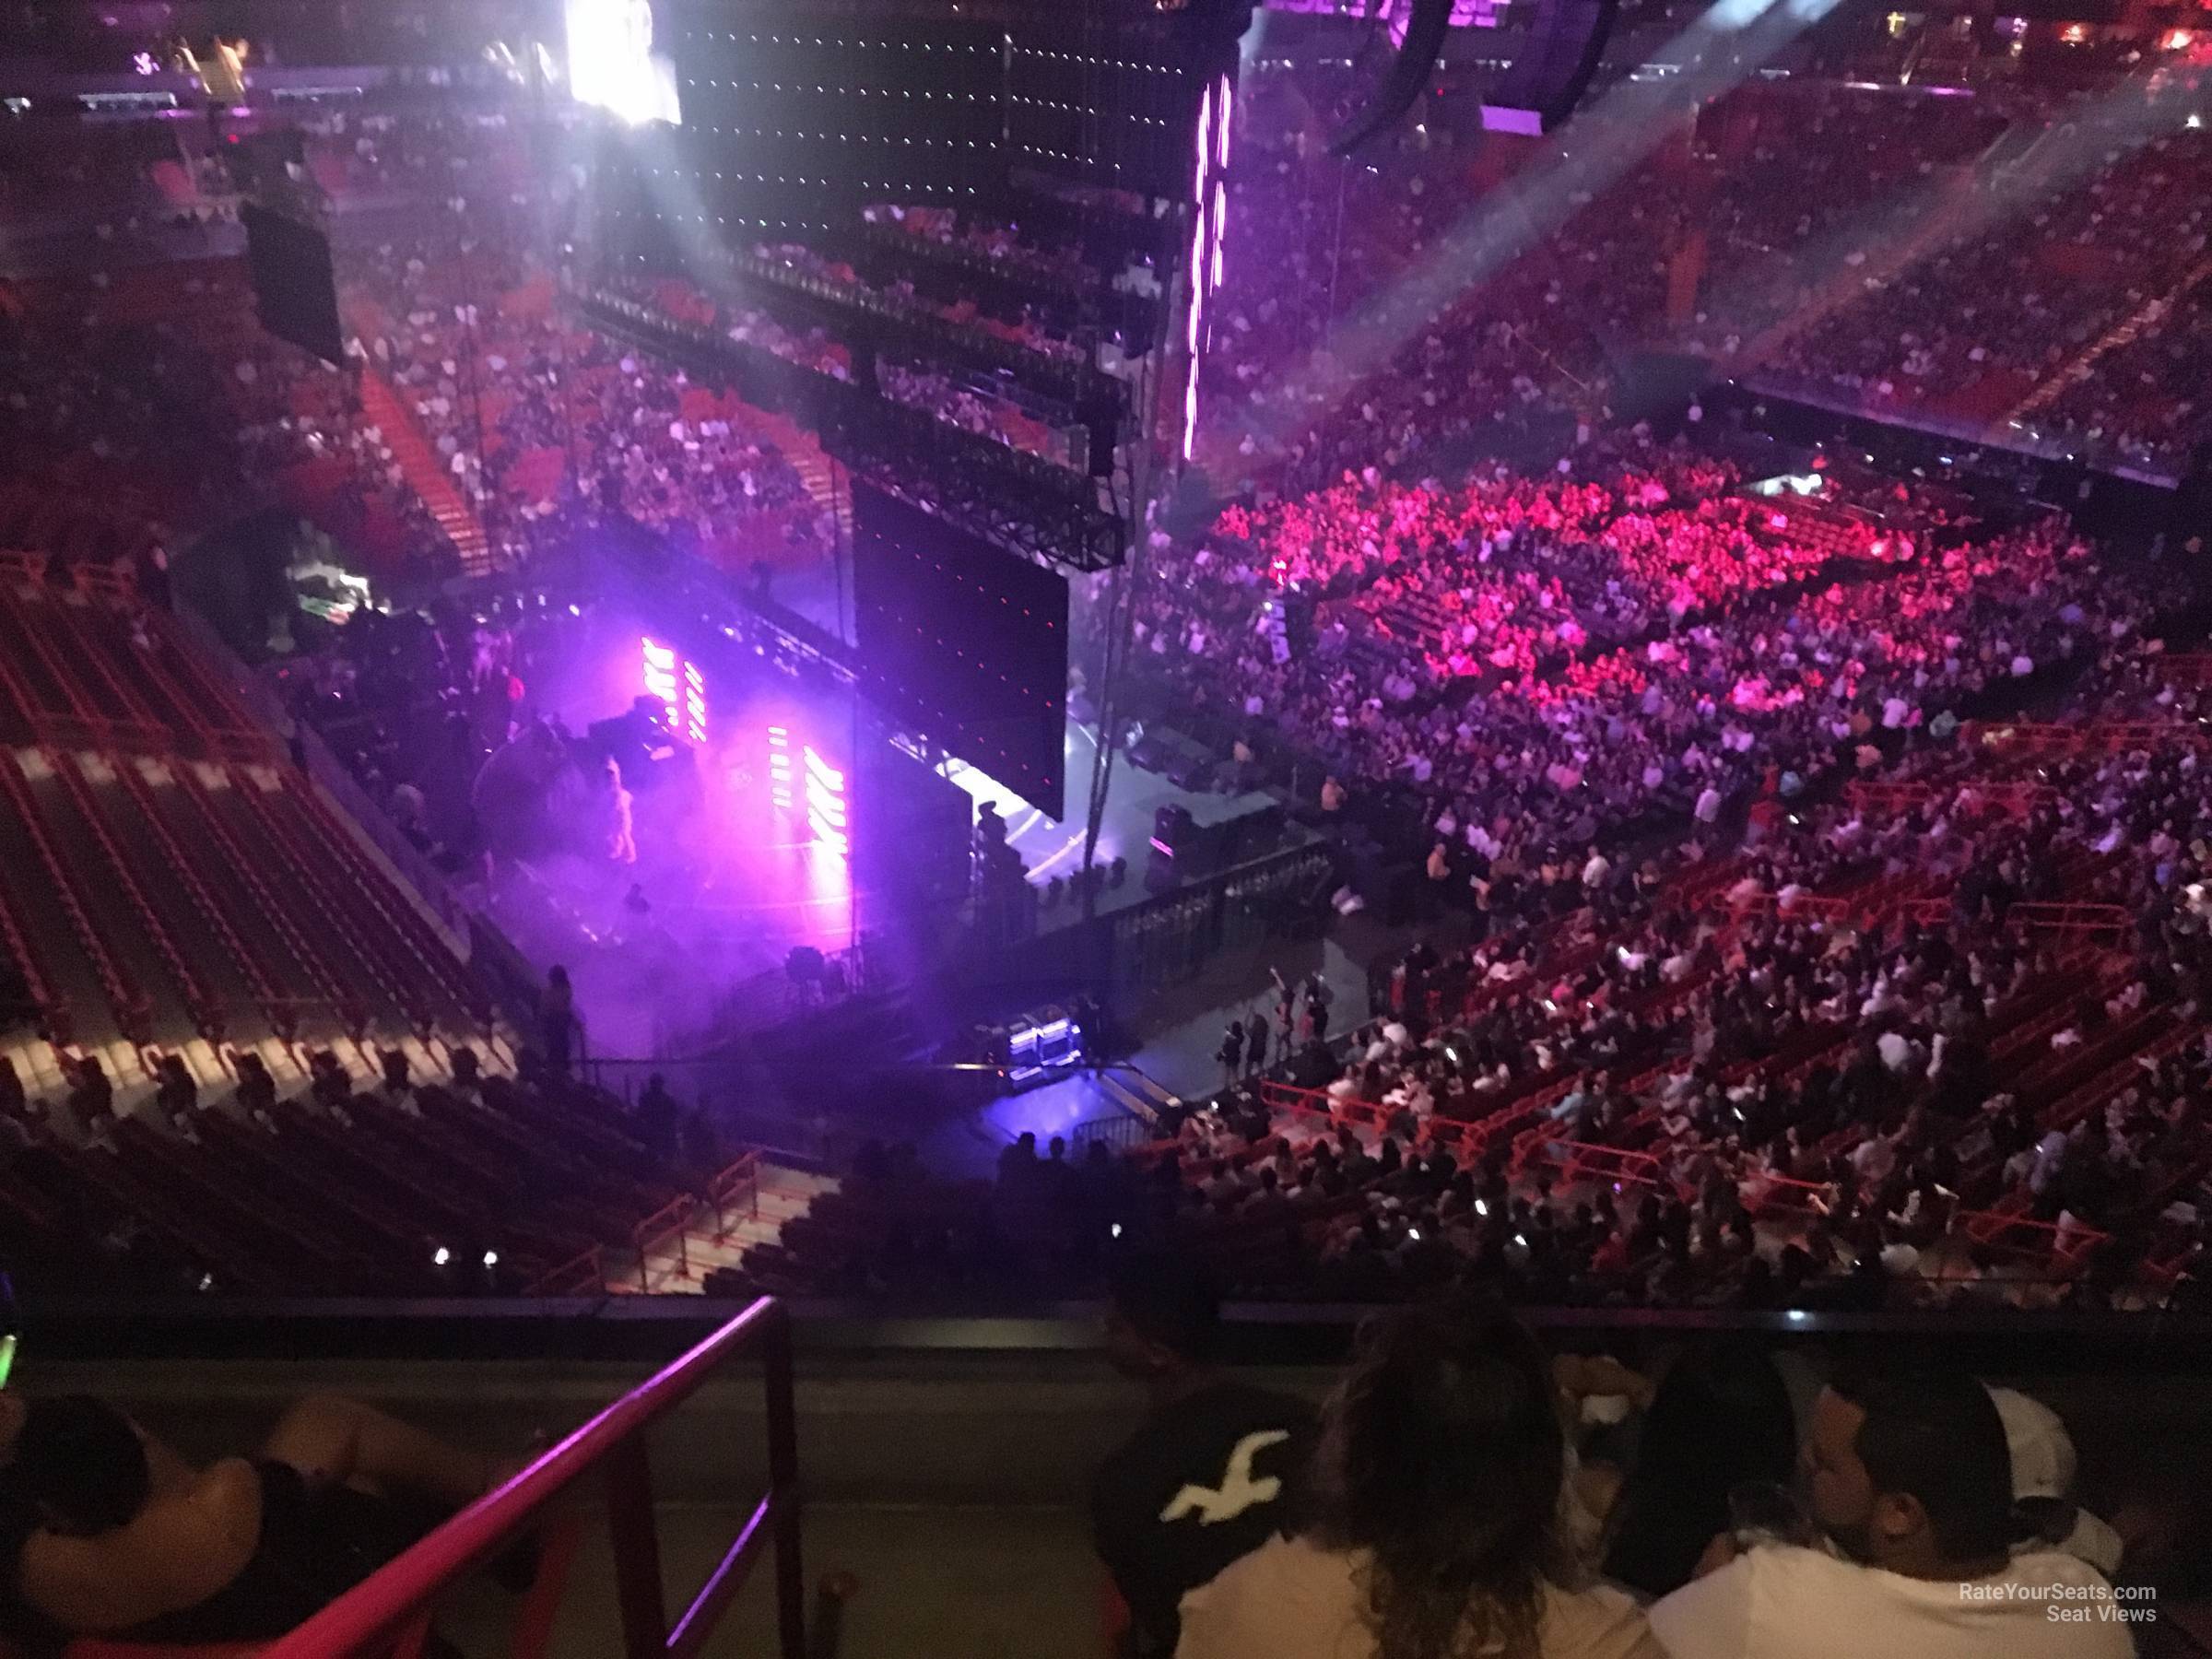 section 329, row 3 seat view  for concert - kaseya center